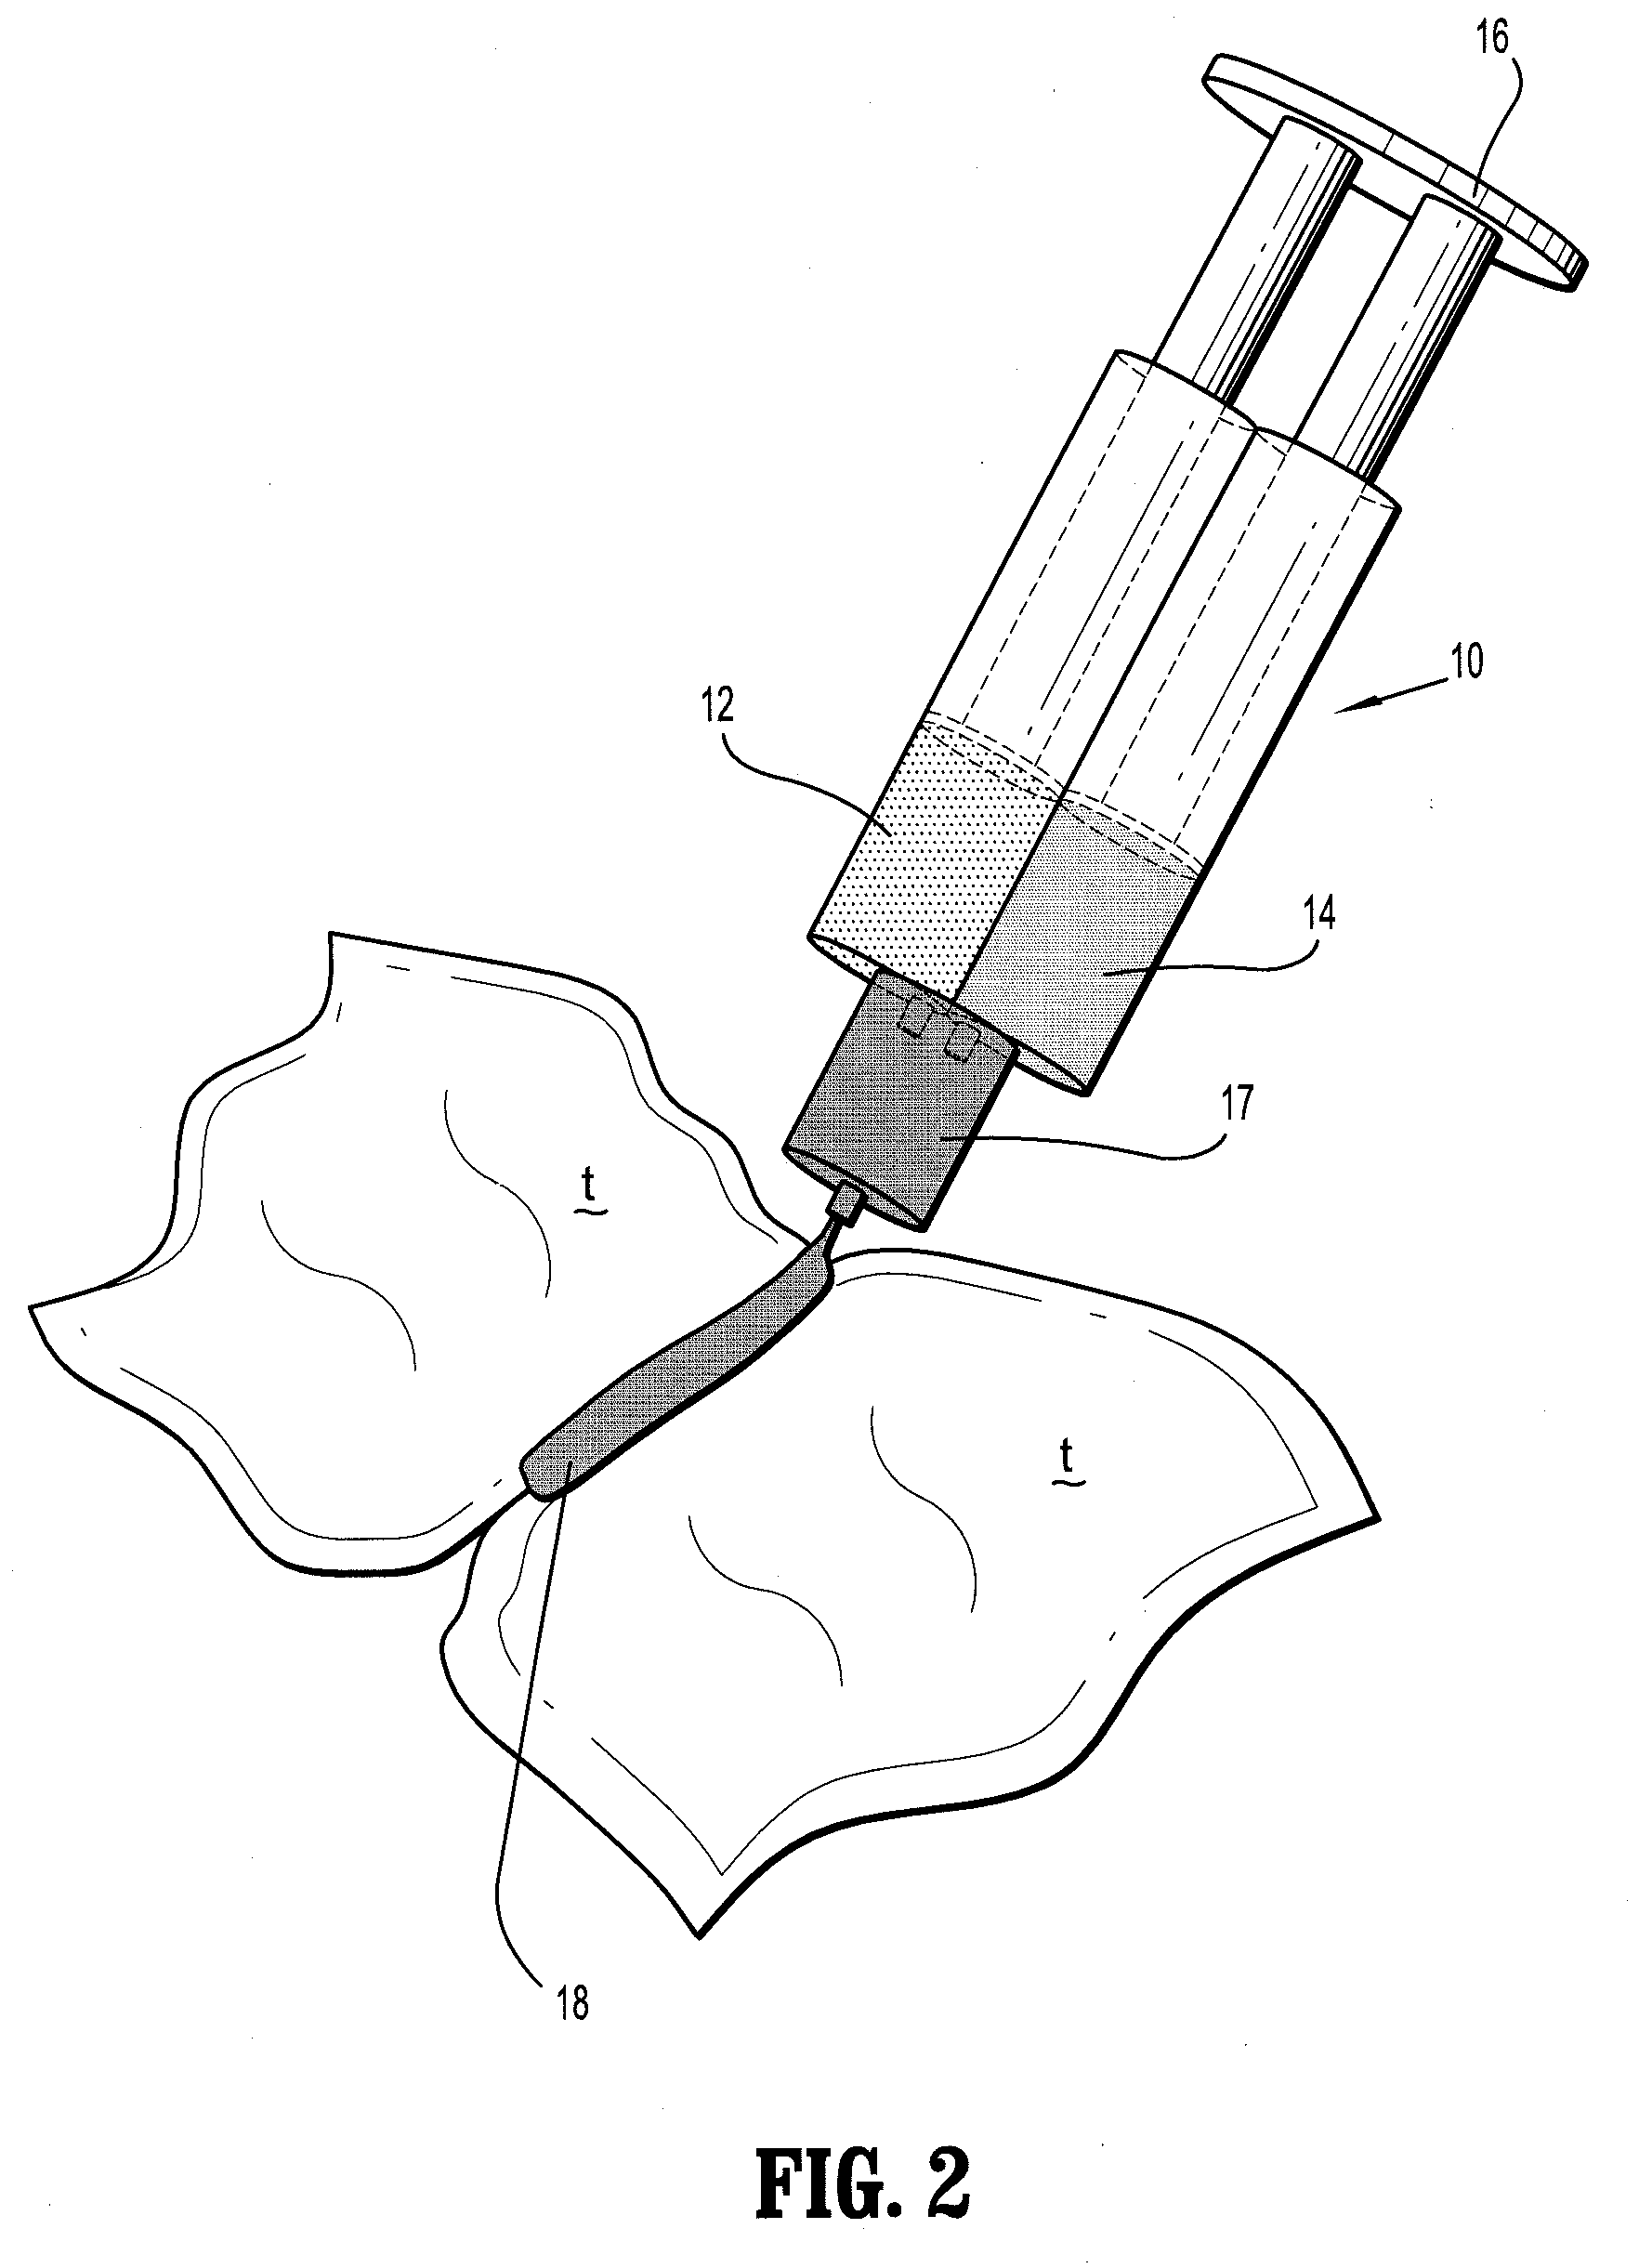 Bioabsorbable Surgical Compositions